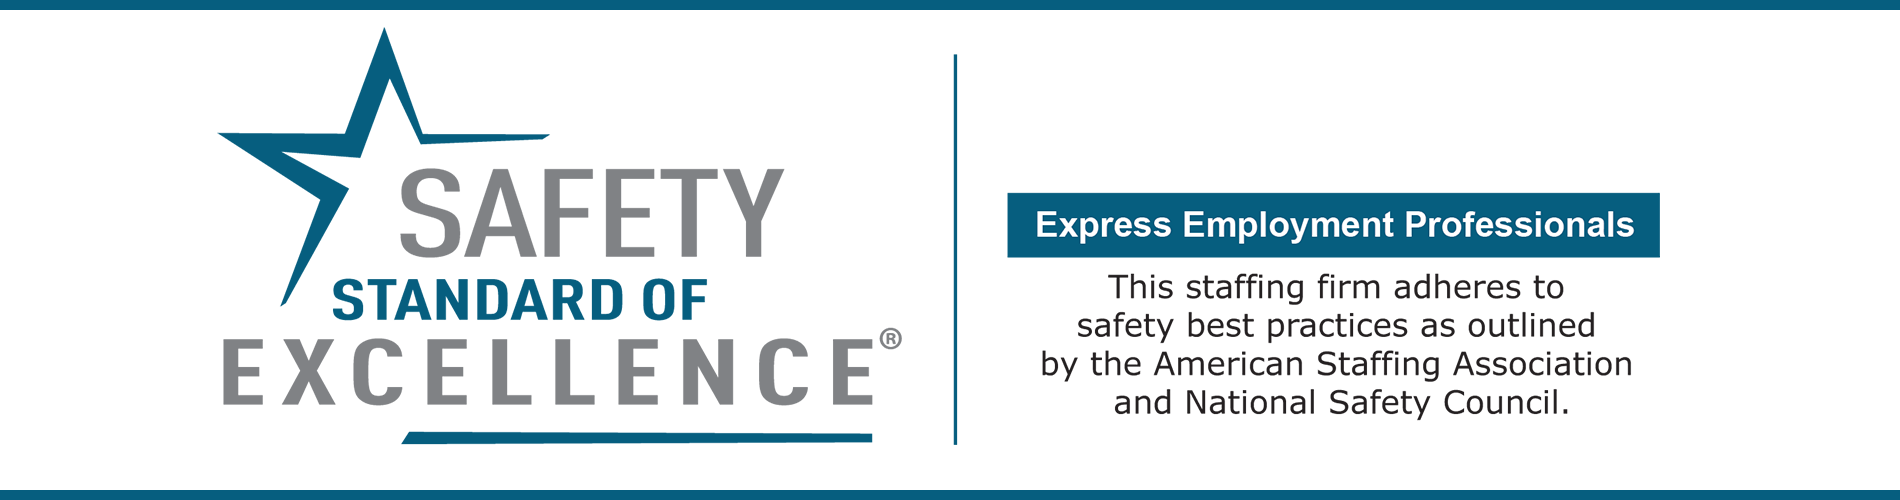 Safety Standard of Excellence - Certificate of Achievement